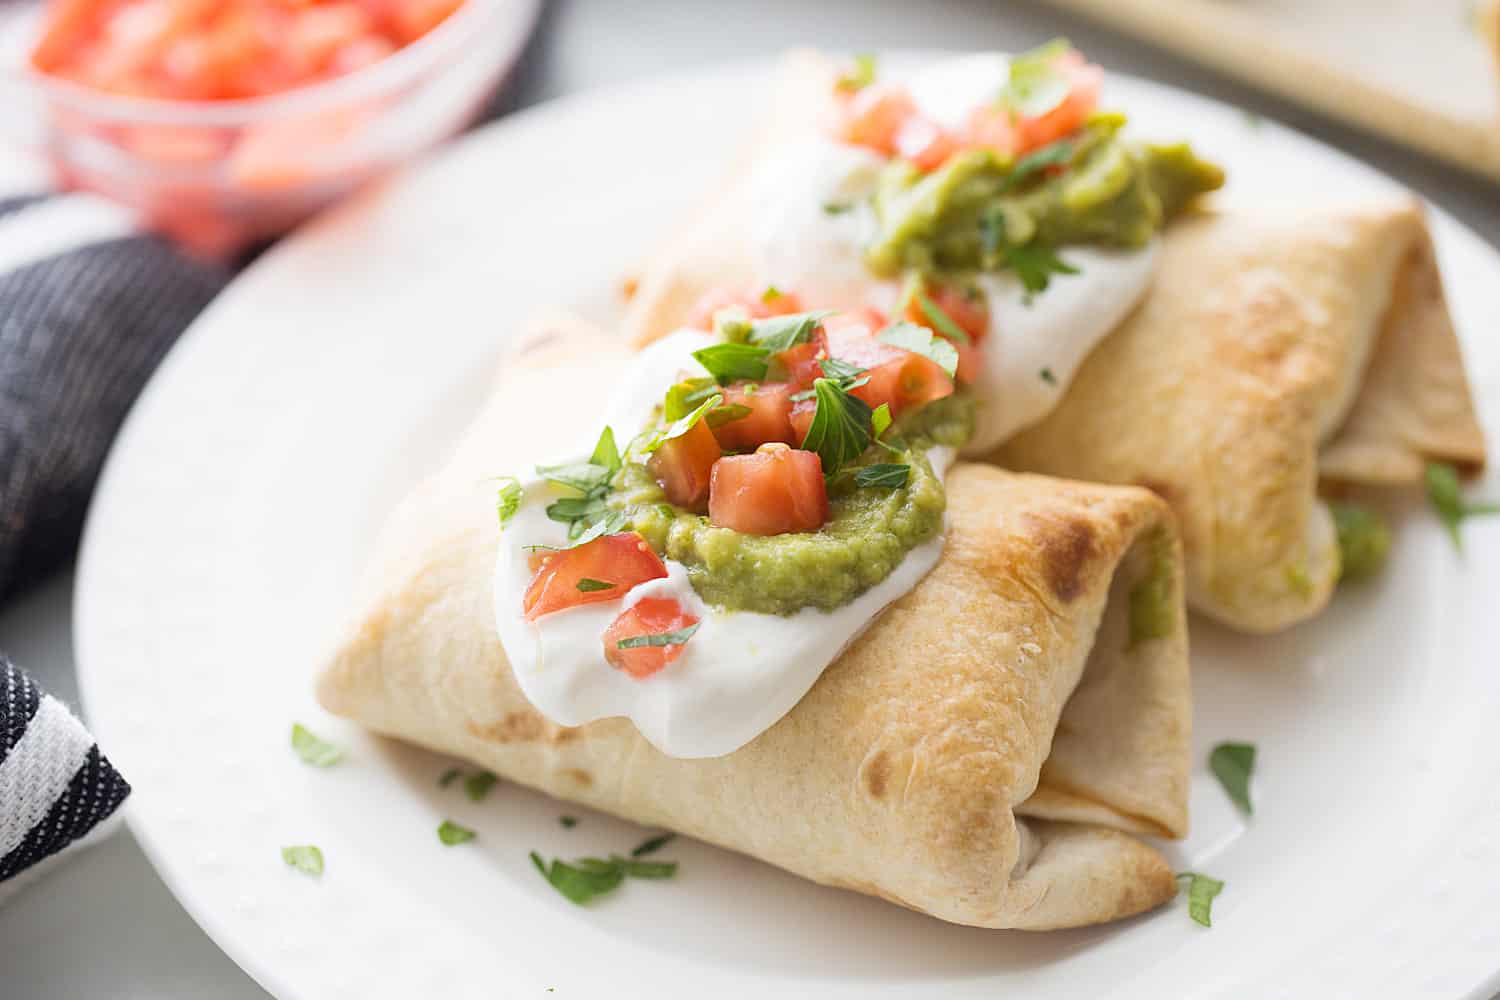 Baked Chicken Chimichangas - Baked chicken chimichangas make for a fun, flavorful alternative to tacos for Taco Tuesday. They're also a super tasty freezer meal! #mexicanrecipe #mexicanfood #chimichangas #easyrecipe #freezermeal #freezerrecipe #halfscratched #tacotuesday